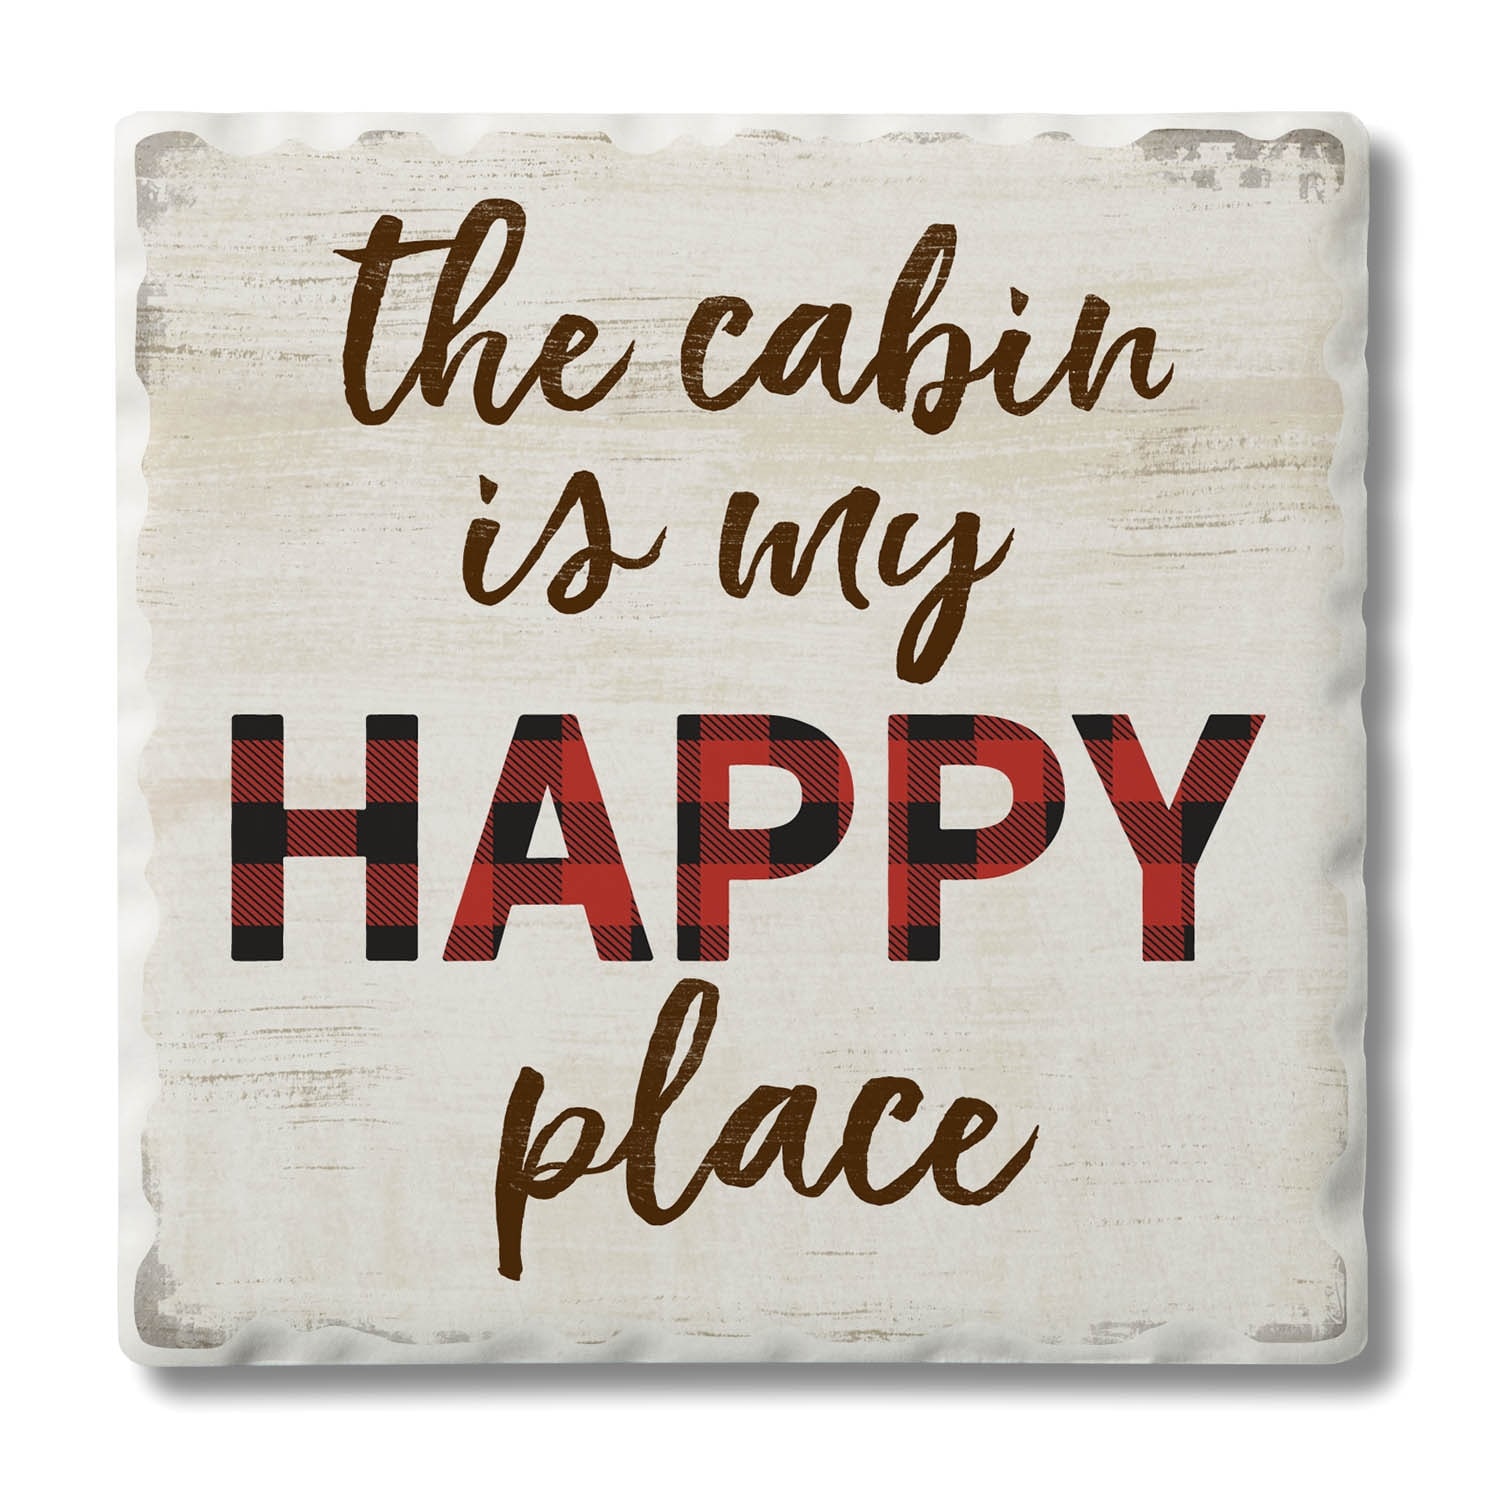 Counterart Absorbent Stone Coasters - Cabin Is Happy Place - Set of 4 - 4x4x227